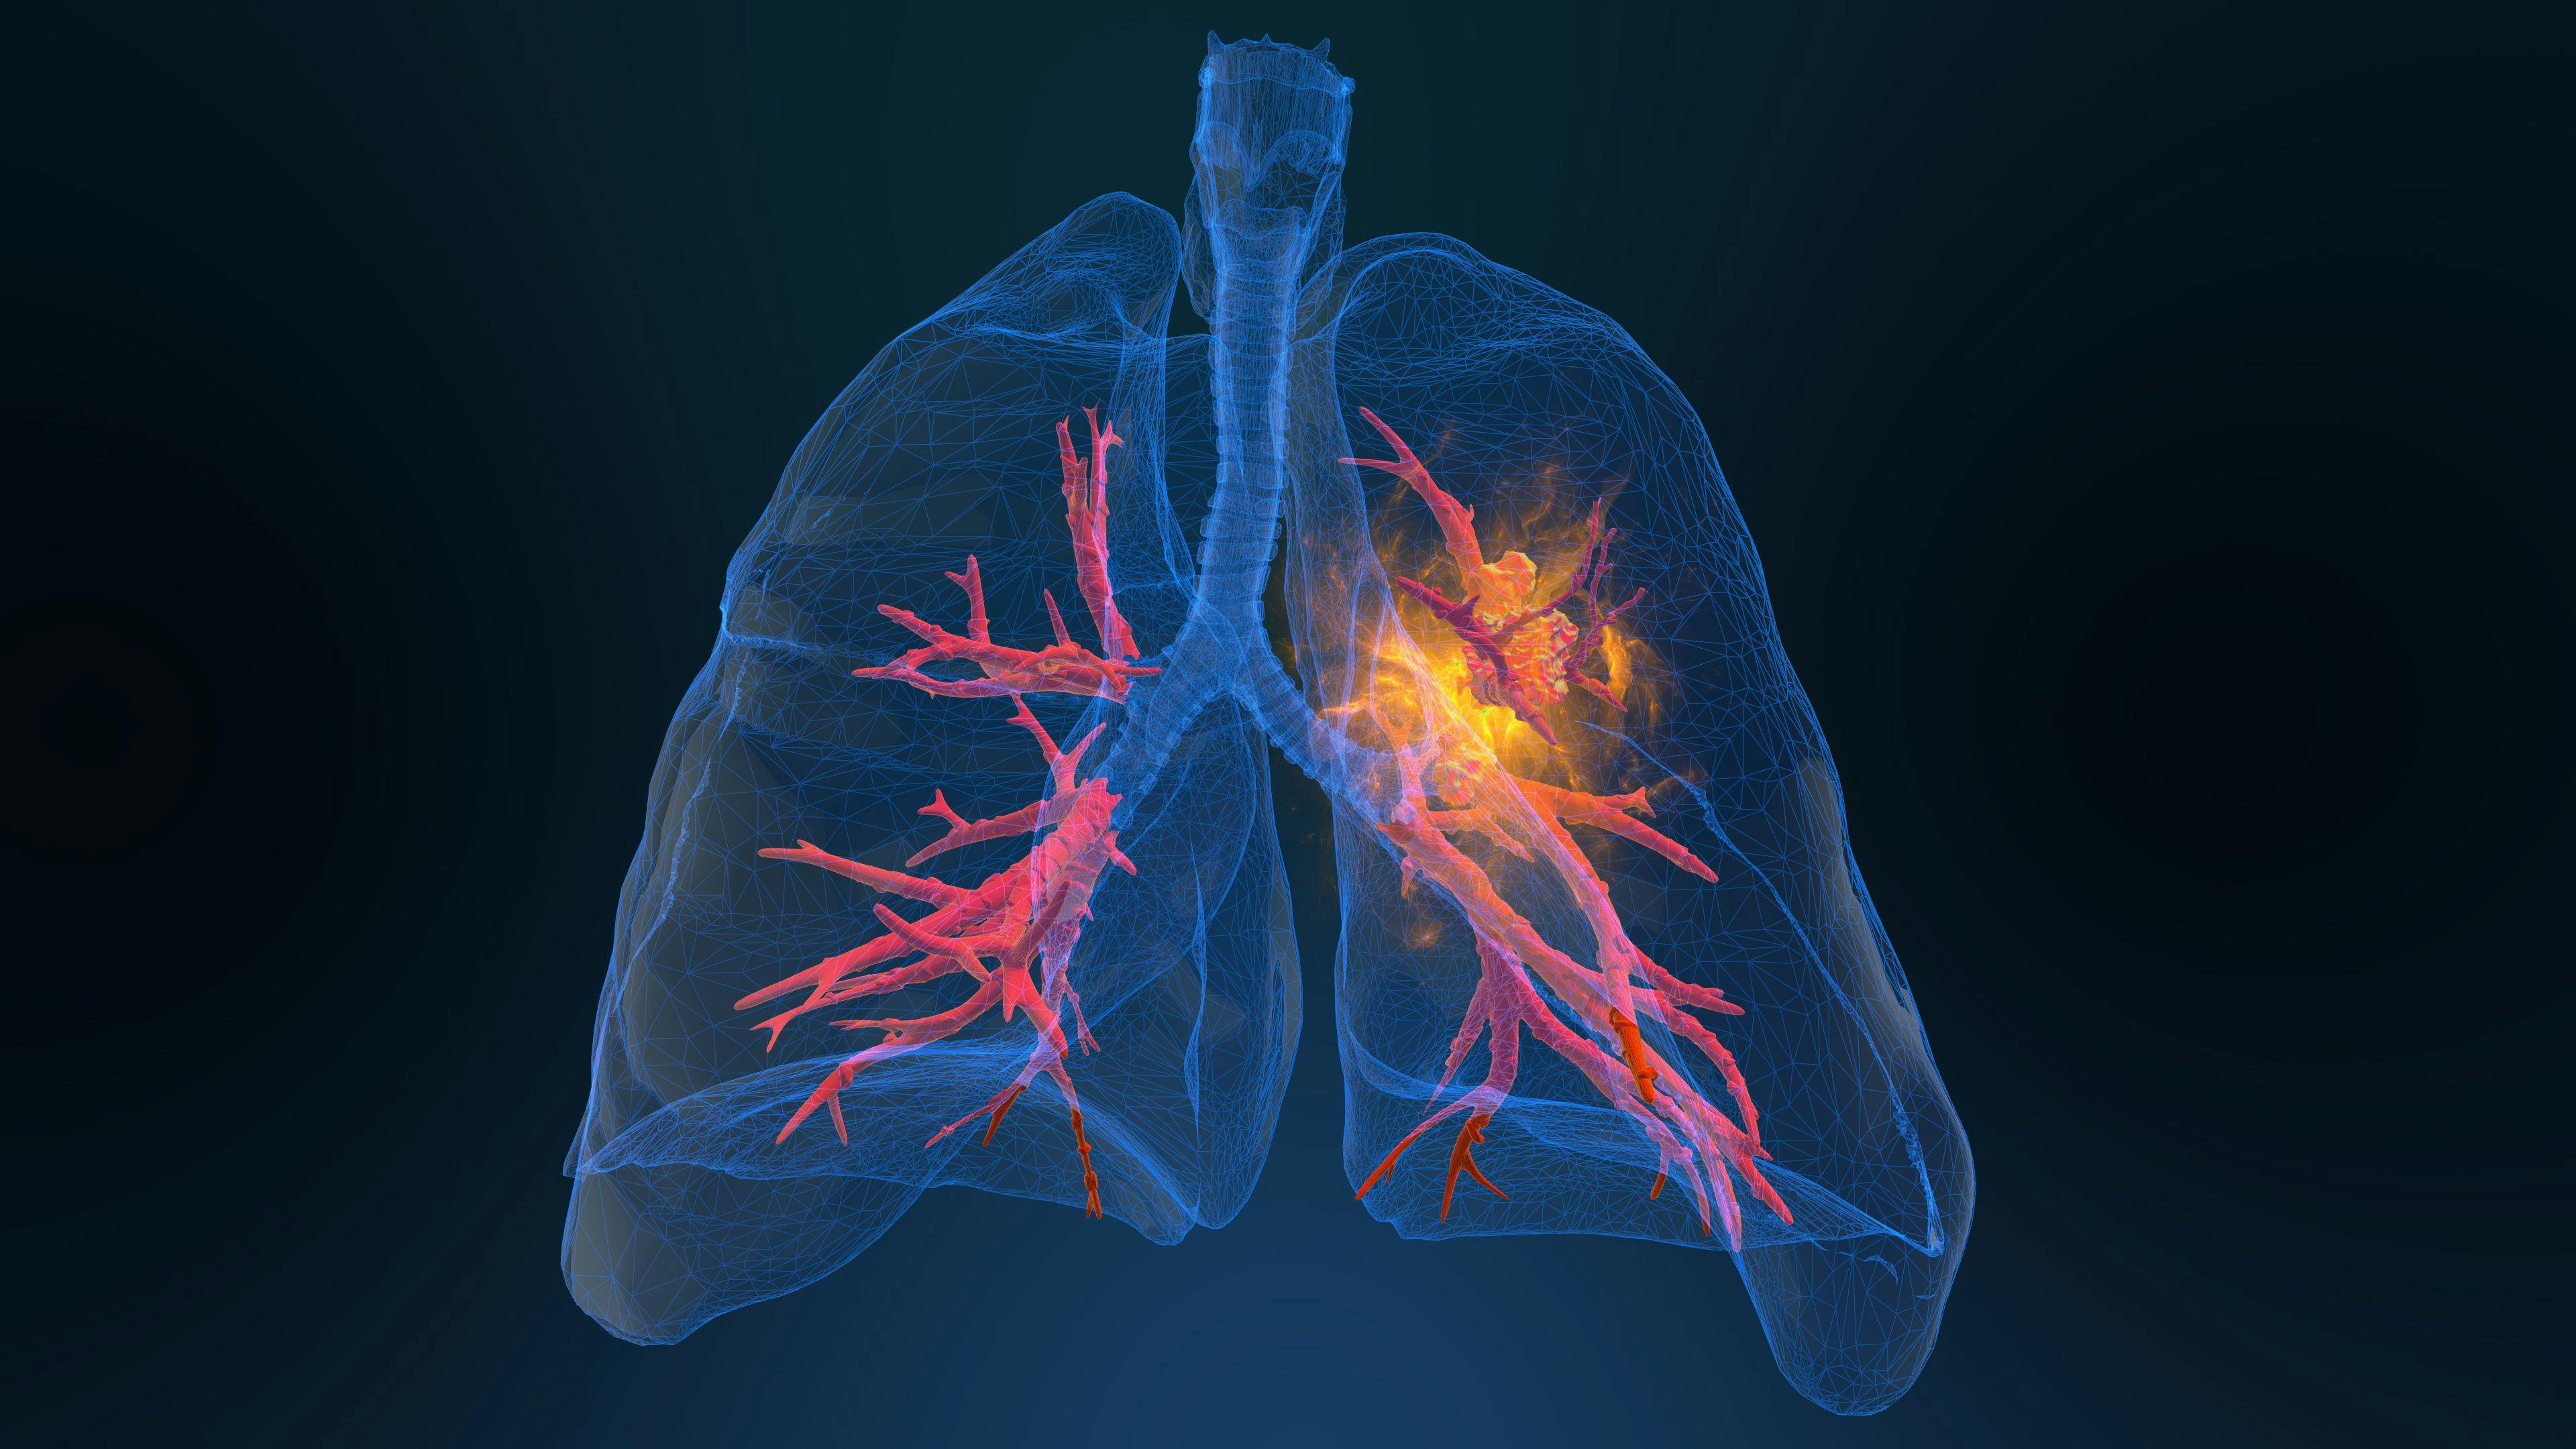 FDA Approves Augtyro to Treat ROS1 Positive Lung Cancer